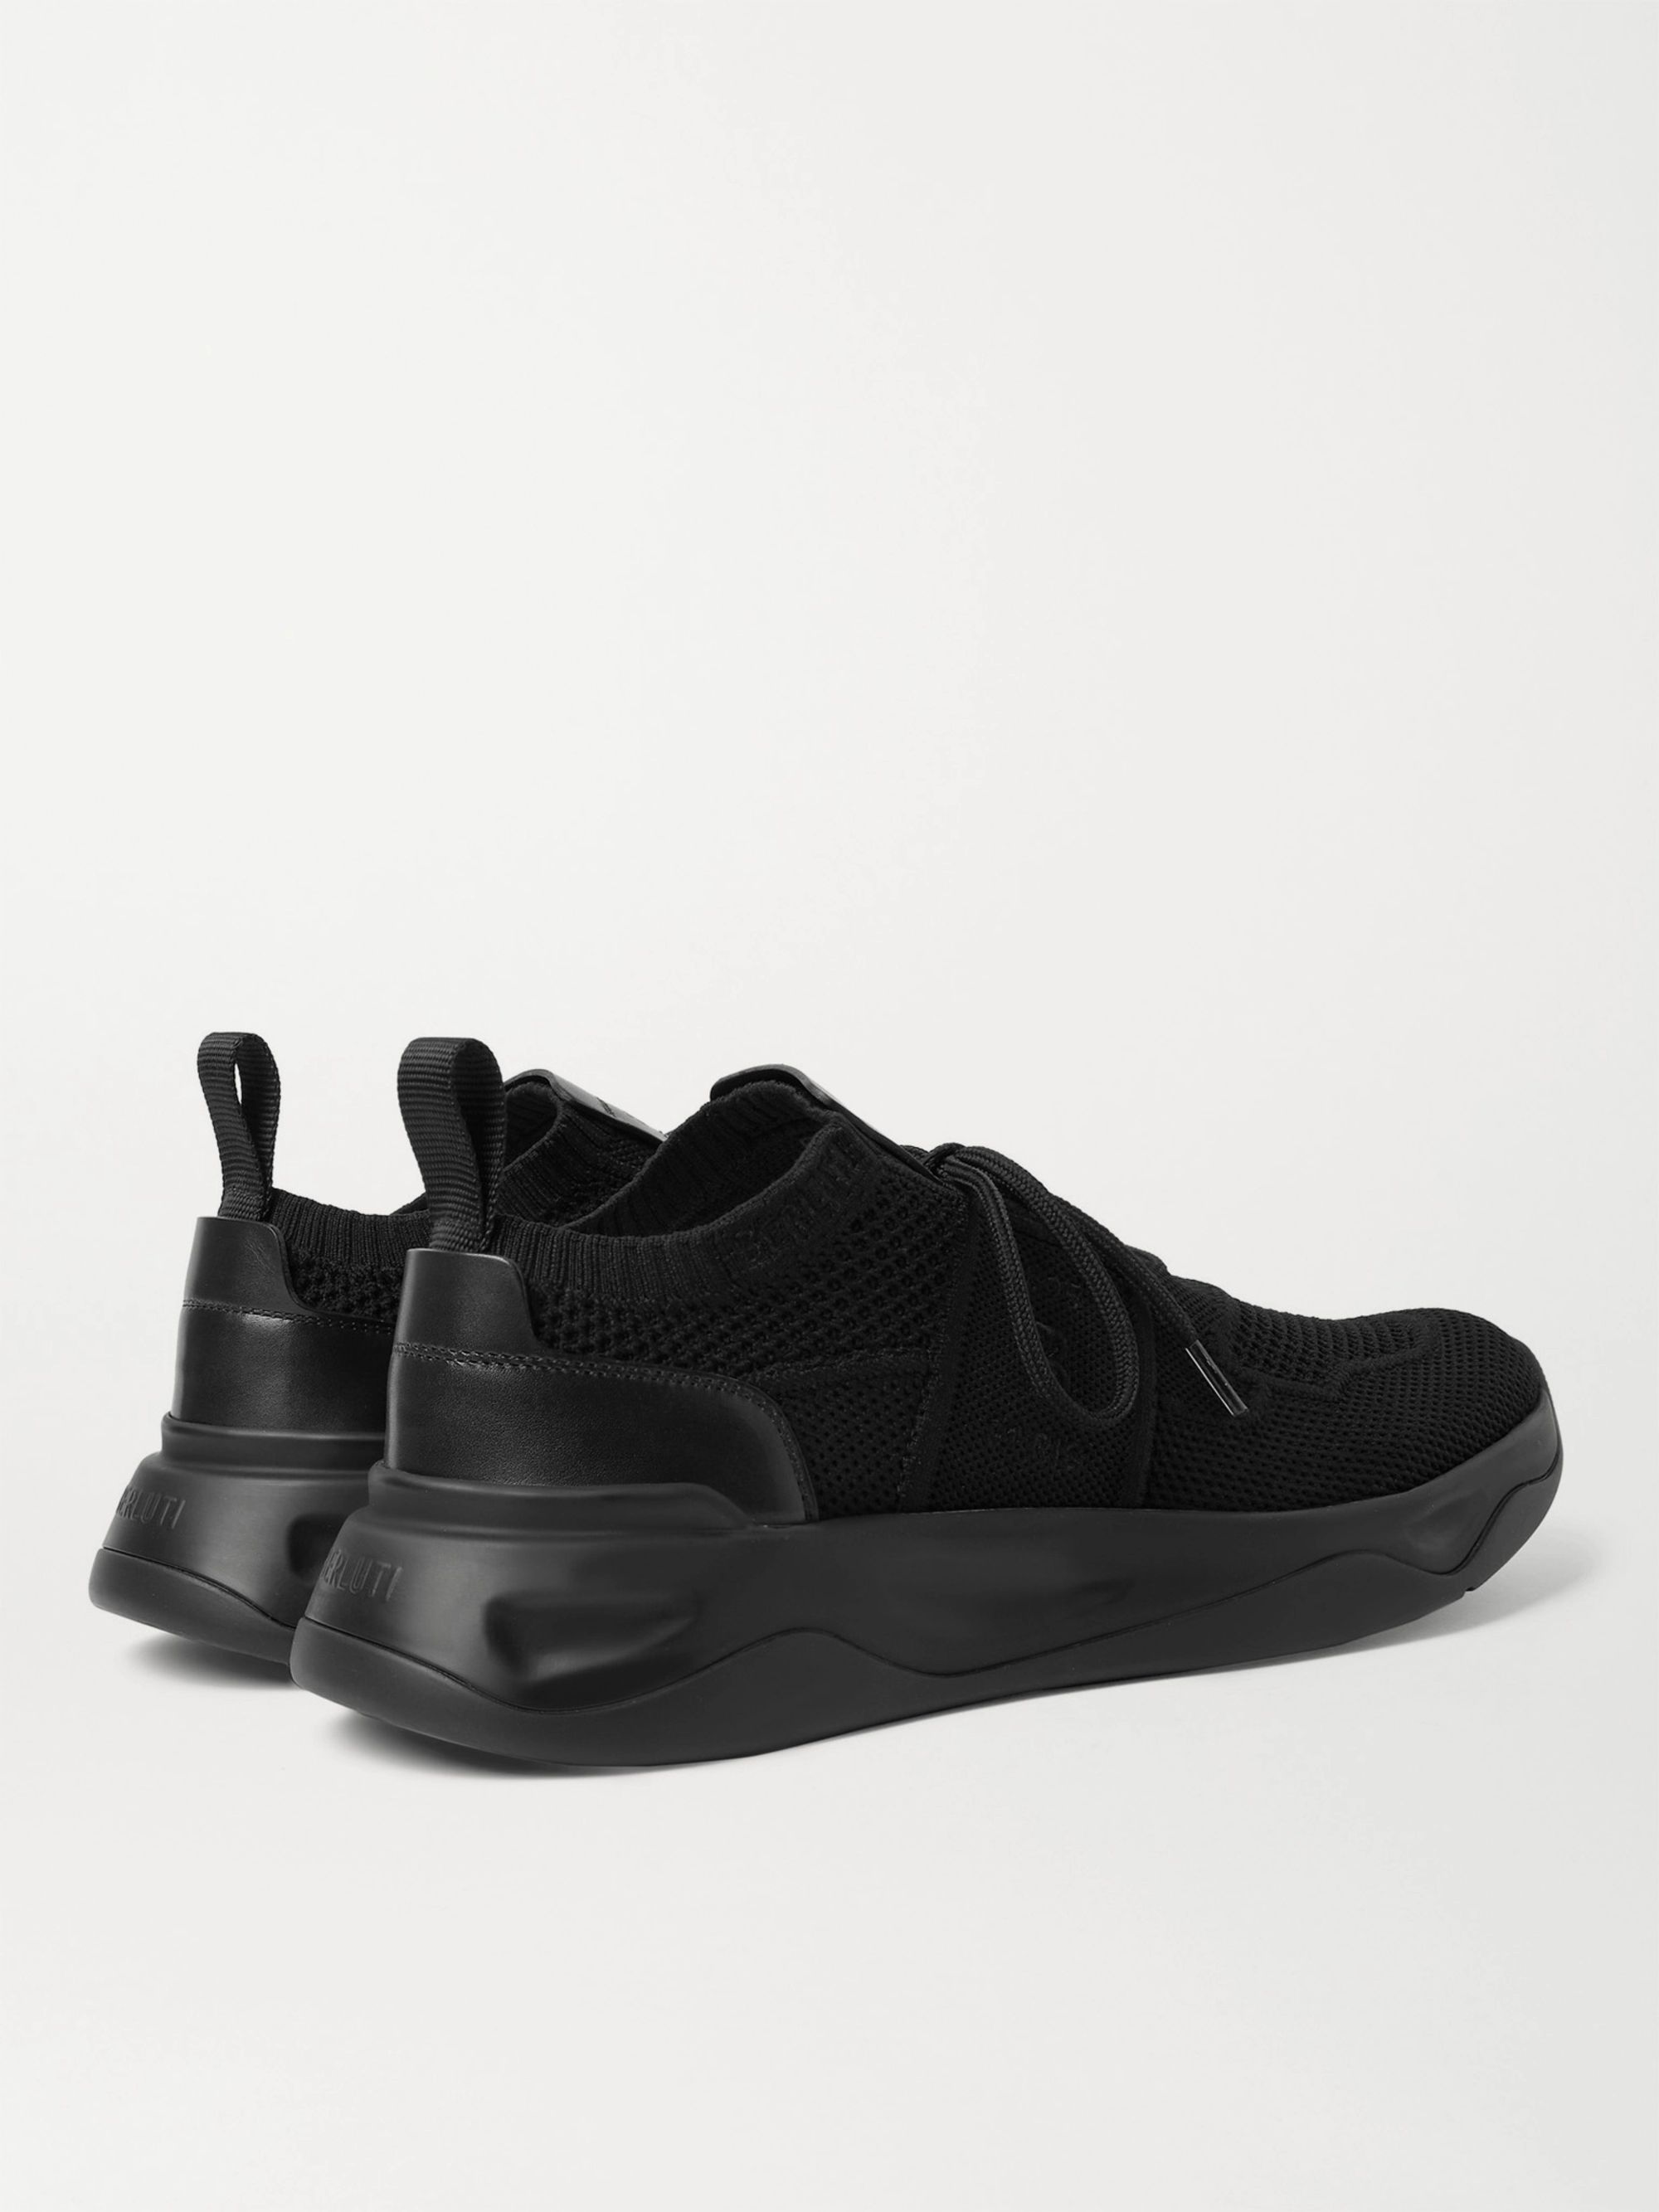 Black Shadow Leather-Trimmed Stretch-Knit Sneakers | Berluti | MR PORTER